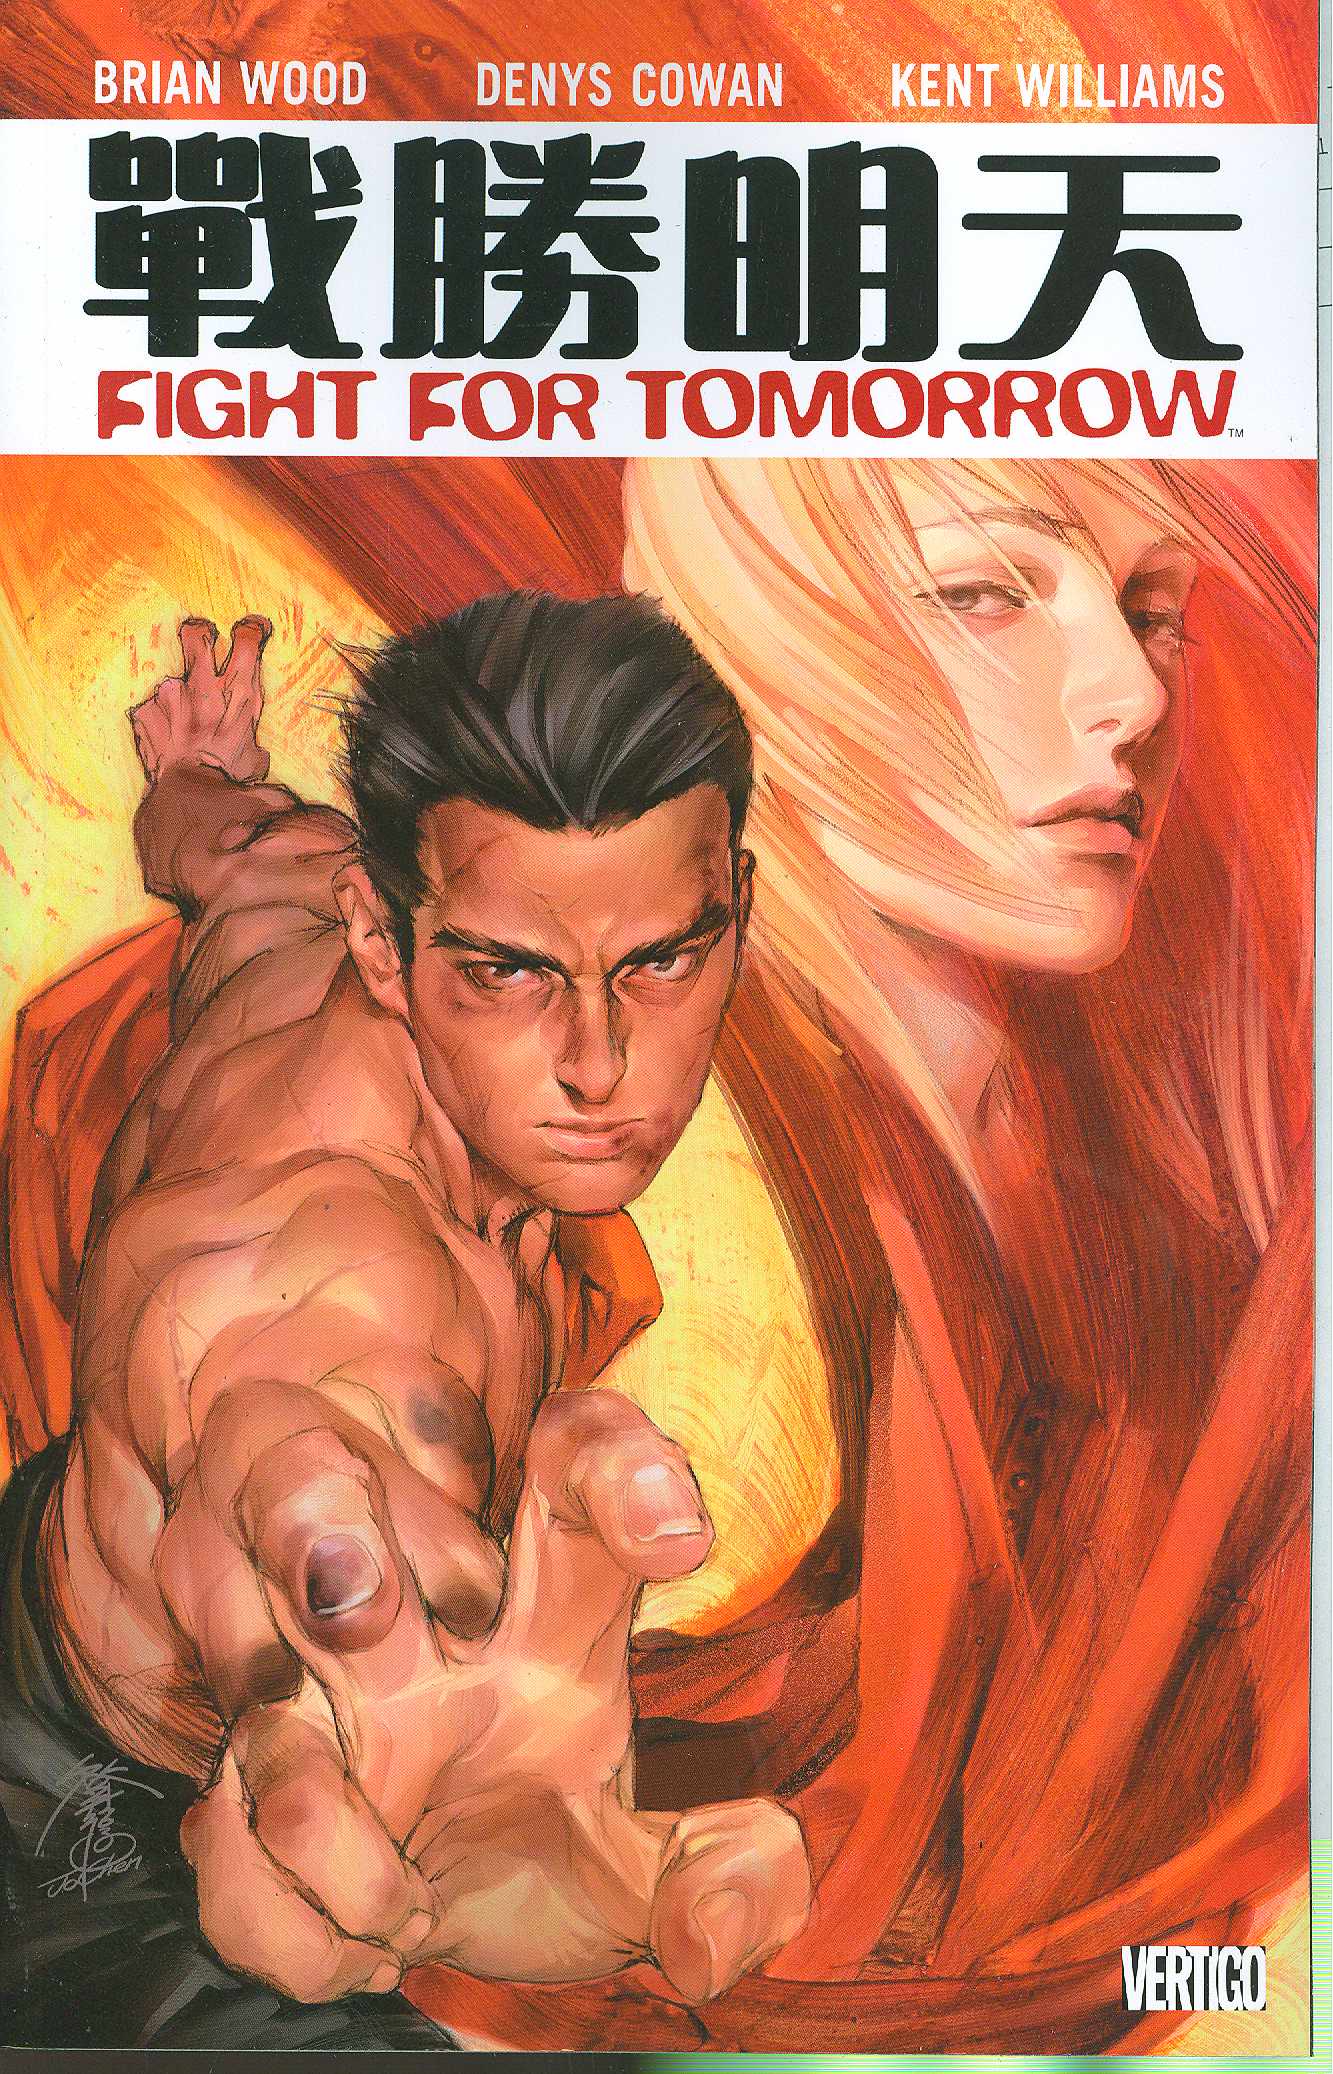 Fight for tomorrow